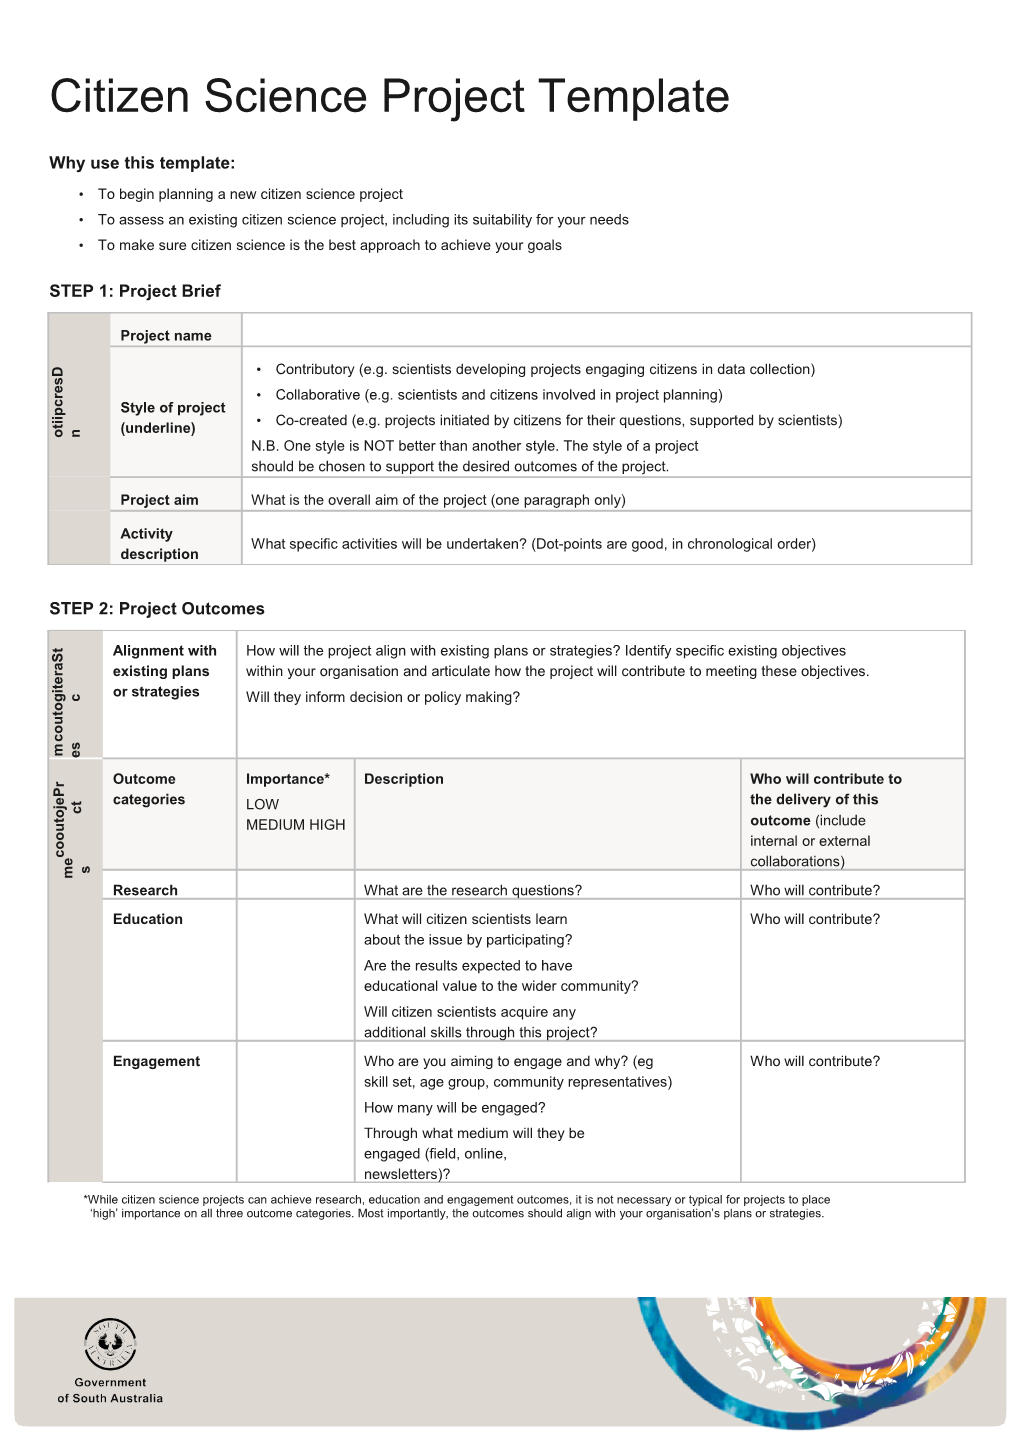 Citizen Science Project Template